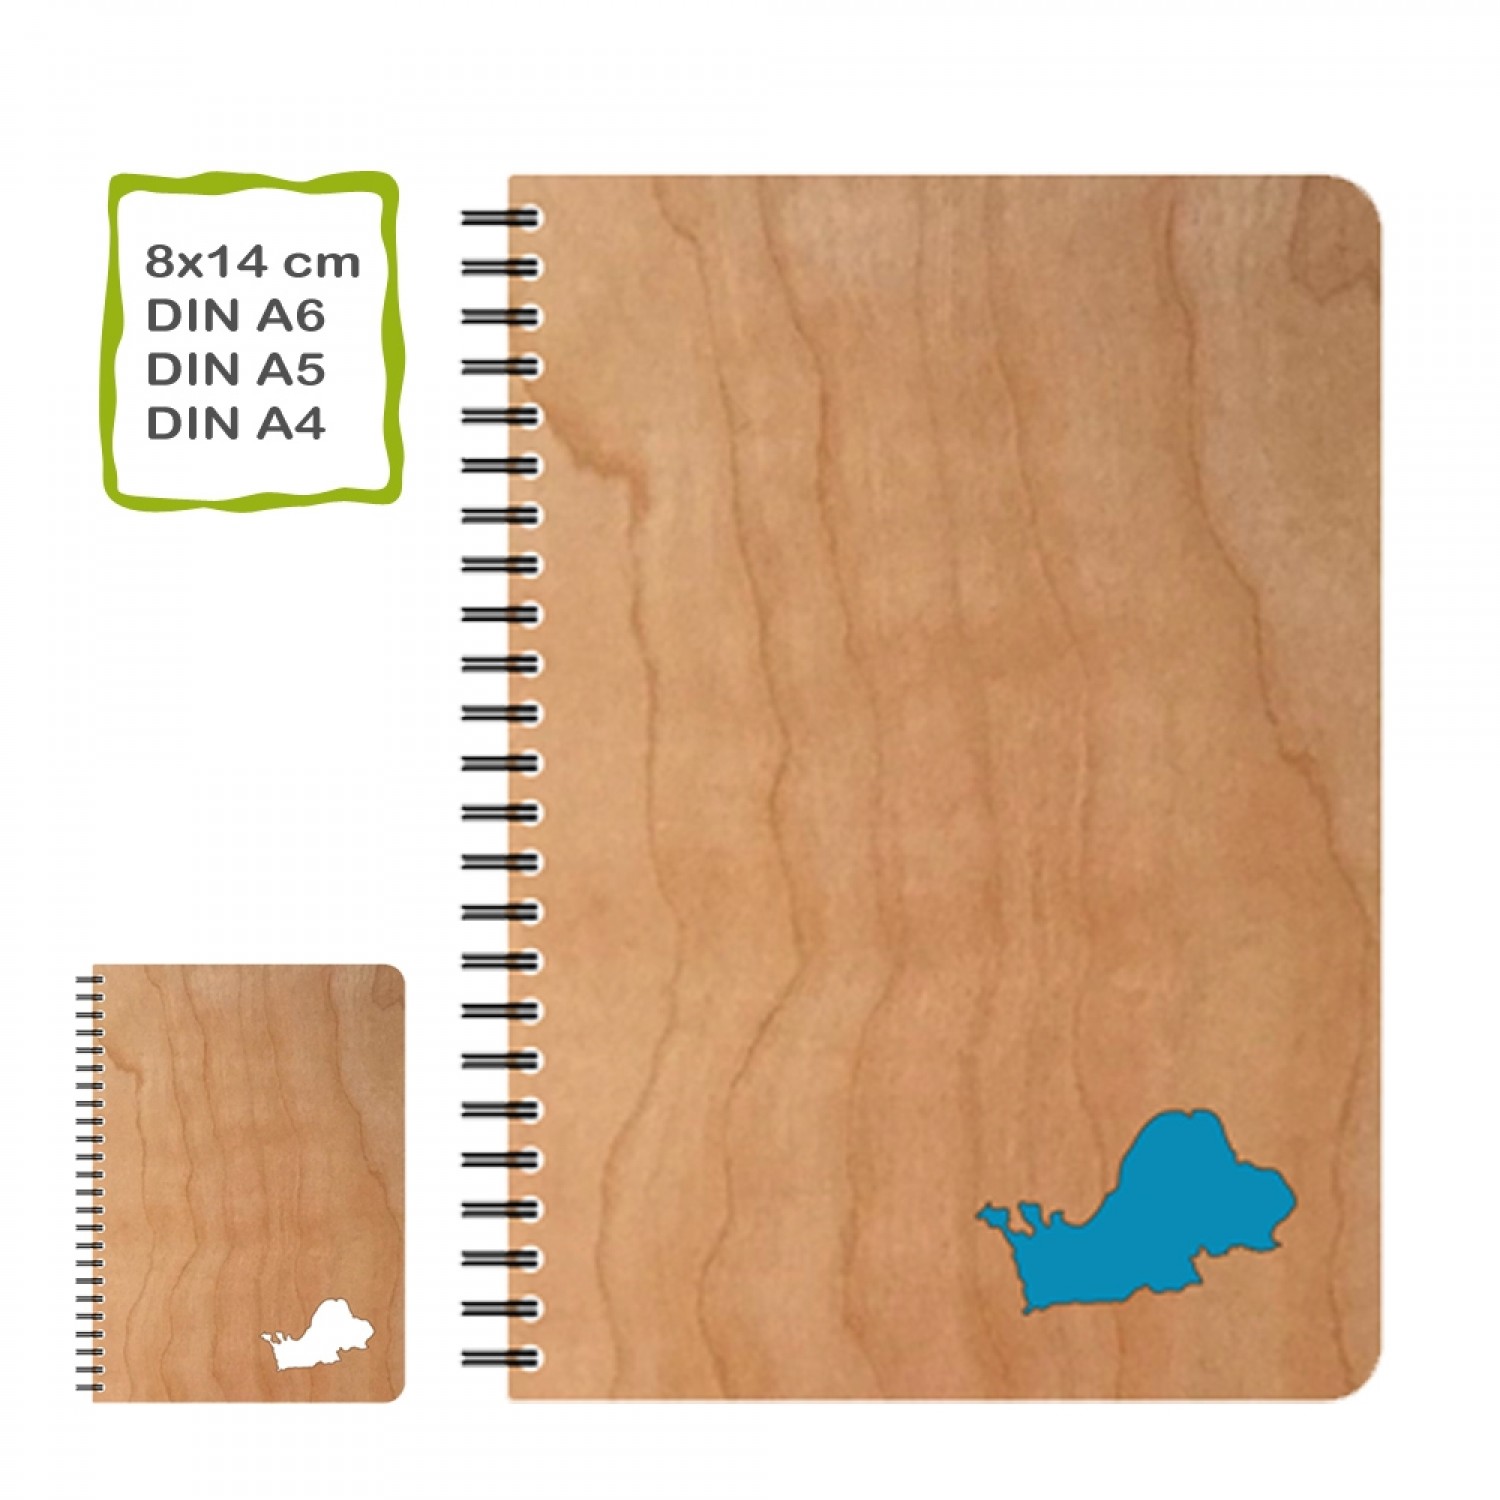 Lake CHIEMSEE Eco Notebook & Eco Paper | echtholz